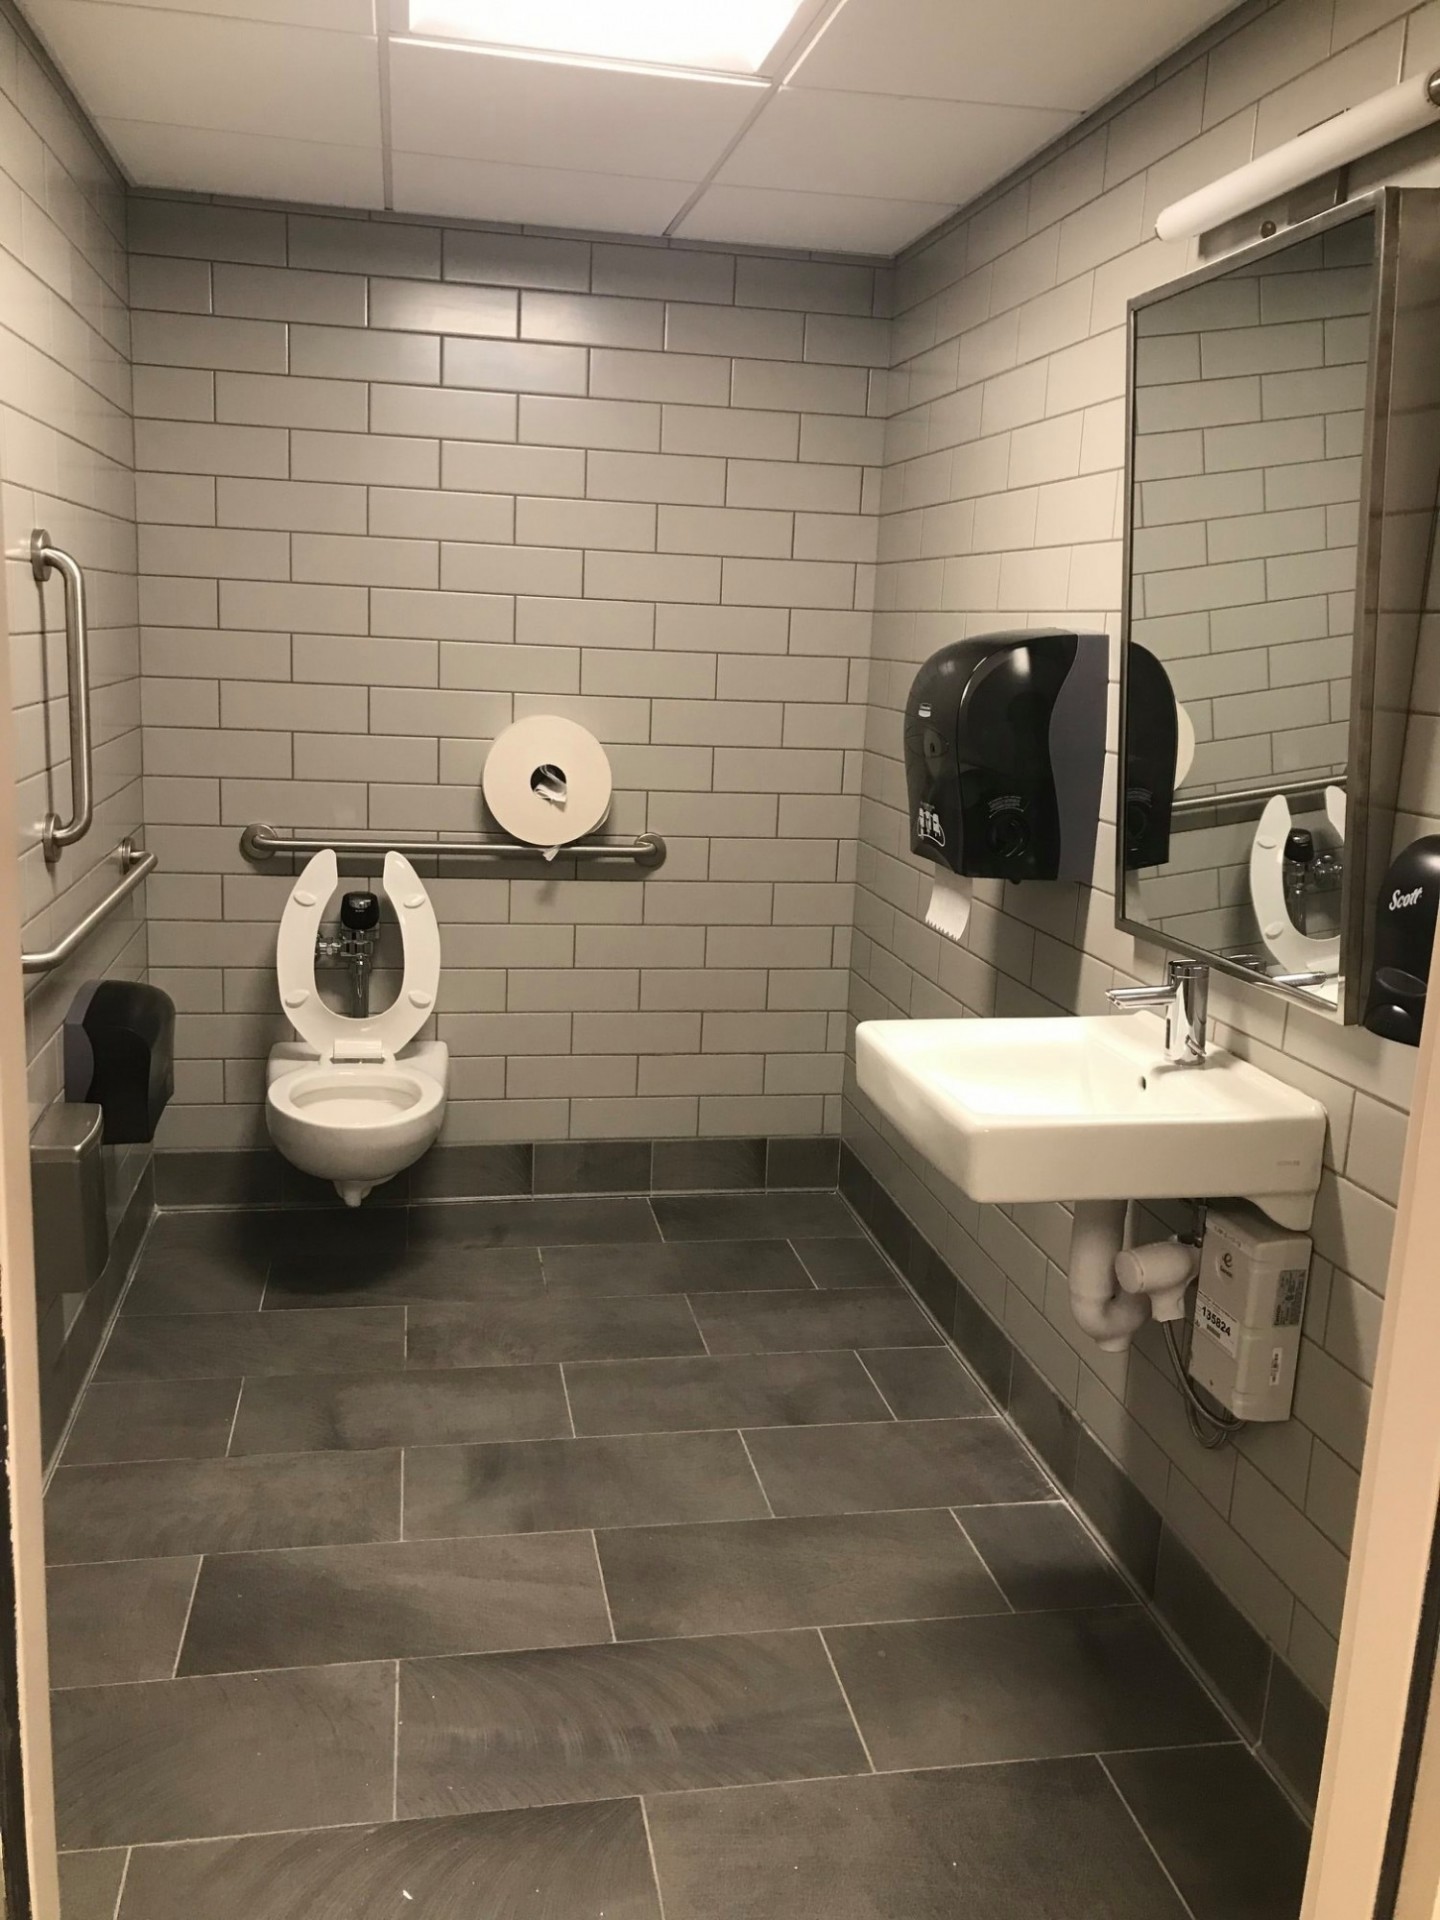 Accessible, single-person restroom with grab bars, white tiled walls, sink, mirror, and gray floor tiles